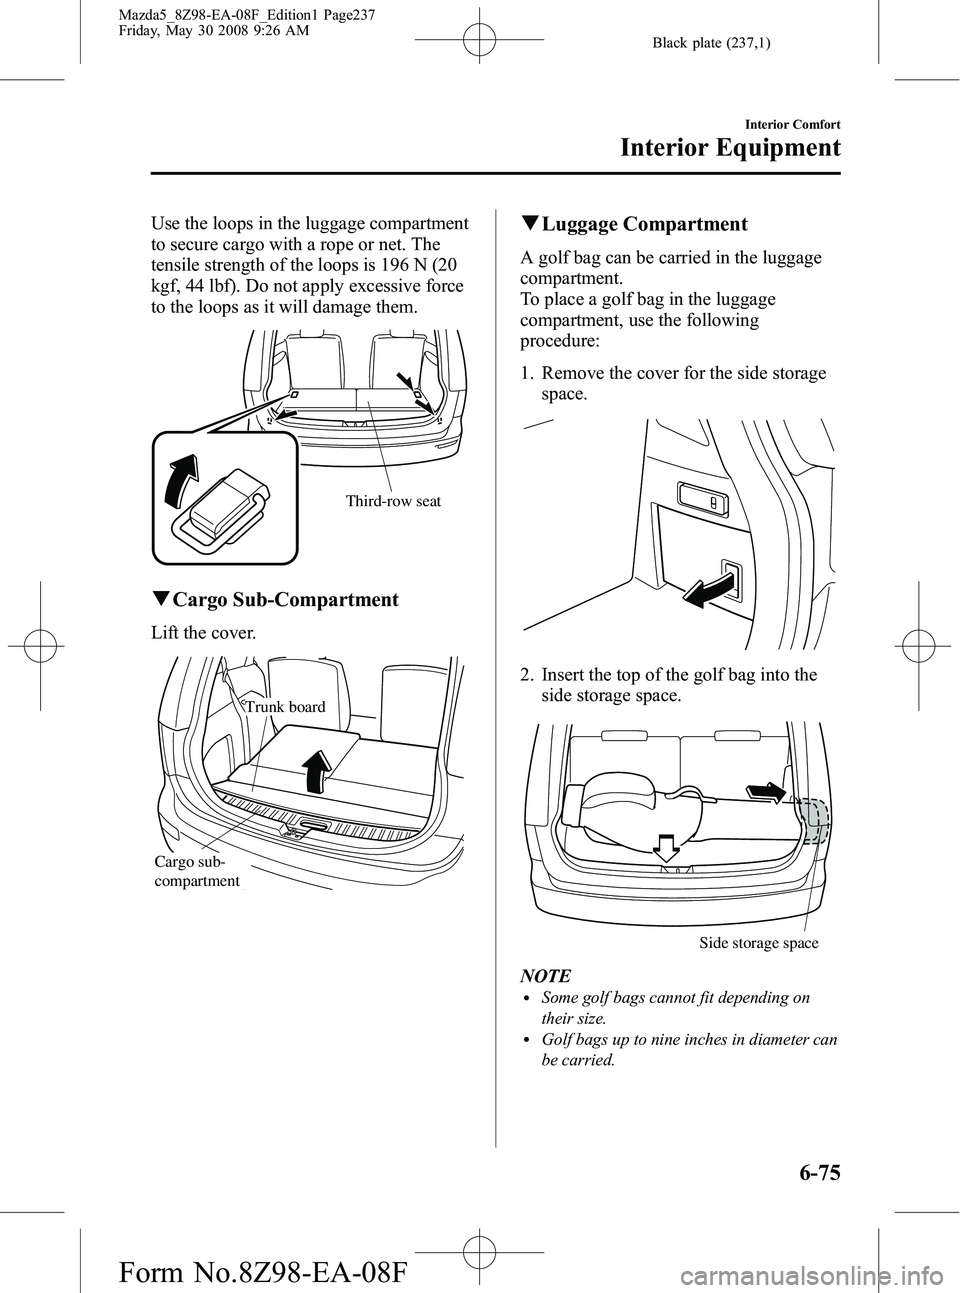 MAZDA MODEL 5 2009  Owners Manual Black plate (237,1)
Use the loops in the luggage compartment
to secure cargo with a rope or net. The
tensile strength of the loops is 196 N (20
kgf, 44 lbf). Do not apply excessive force
to the loops 